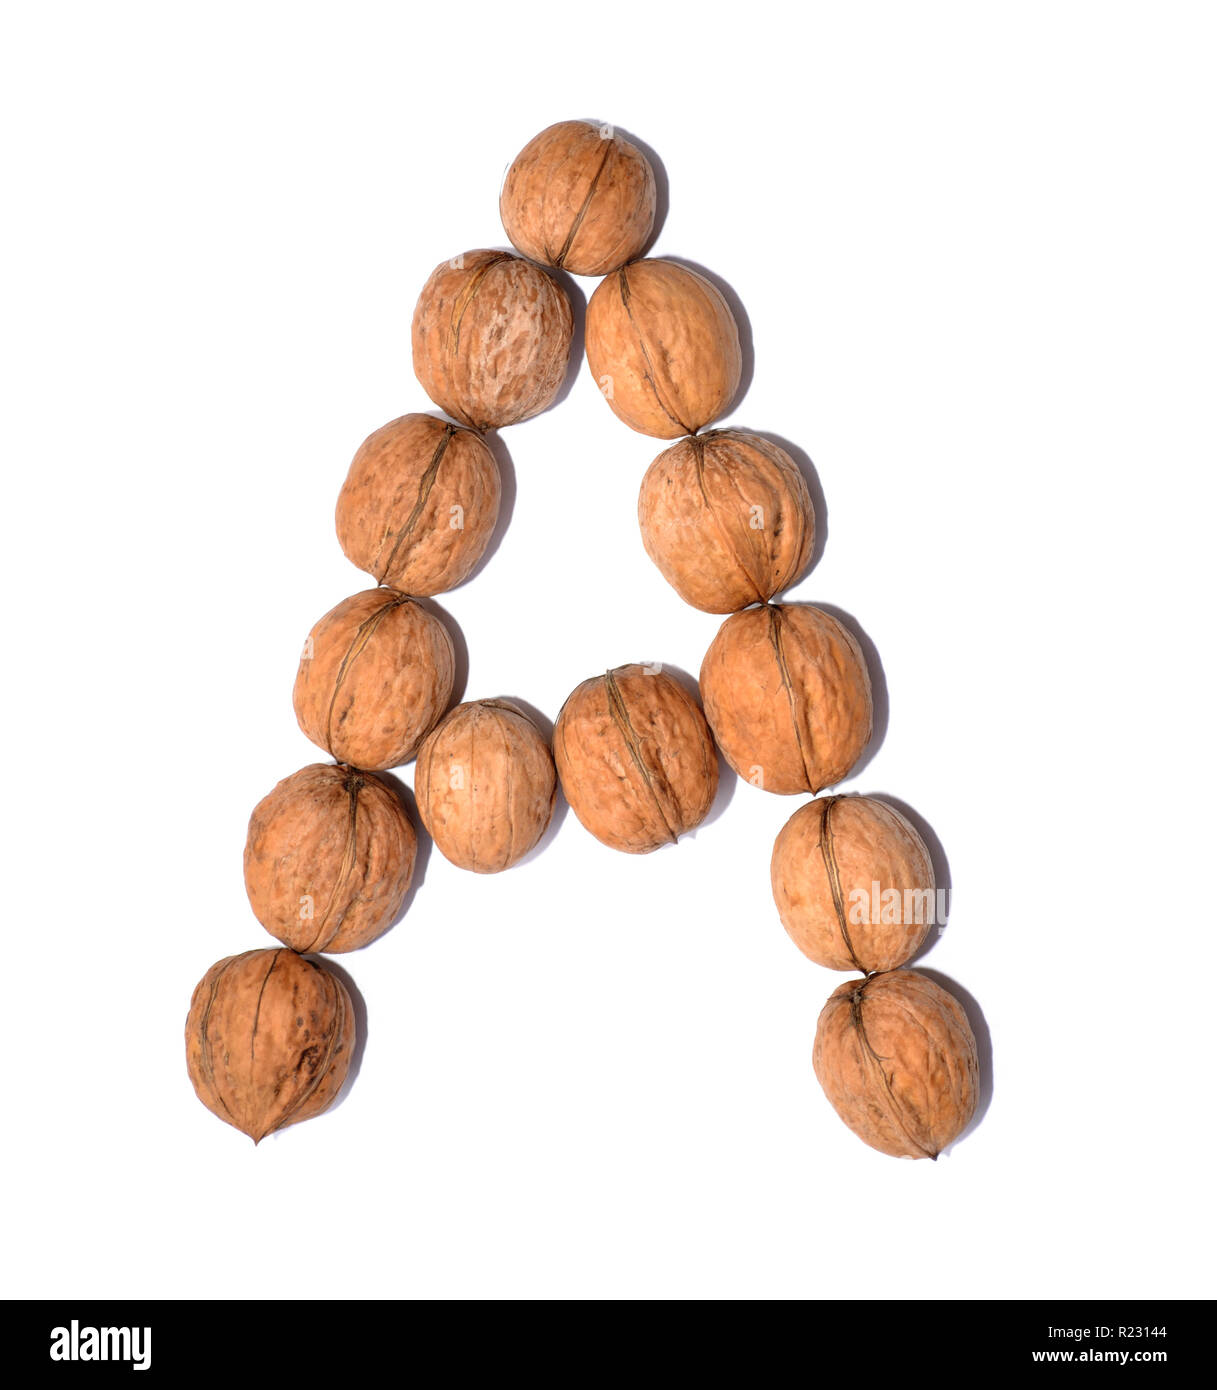 Letter A made with nuts to form a letter of the alphabet. Fruit letters on a white background. Stock Photo